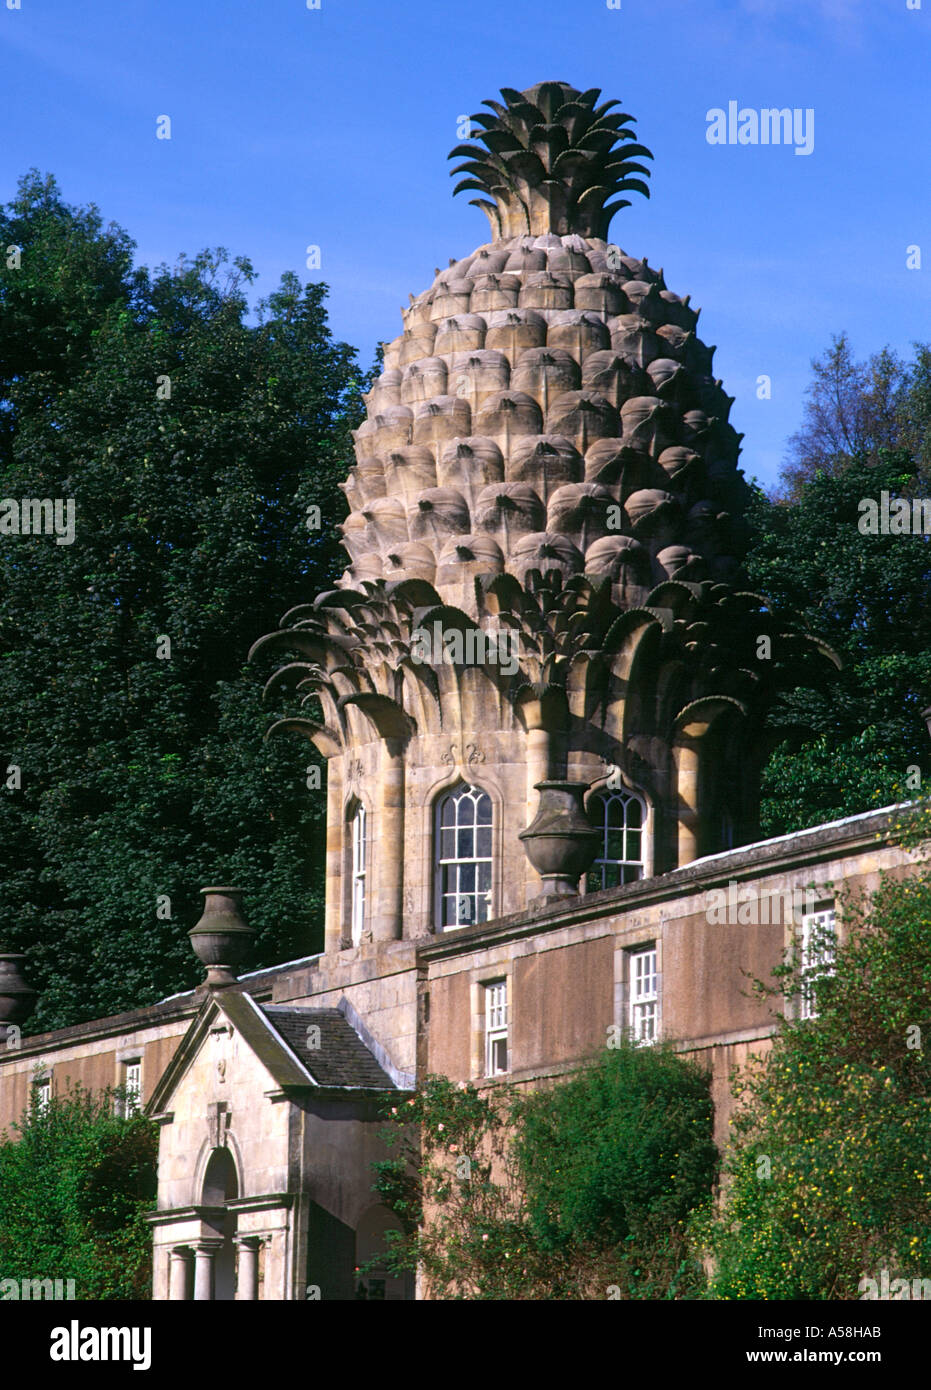 dh Dunmore Pineapple DUNMORE PARK STIRLINGSHIRE Garden wall with Pineapple roofed house scotland heritage facade uk Stock Photo